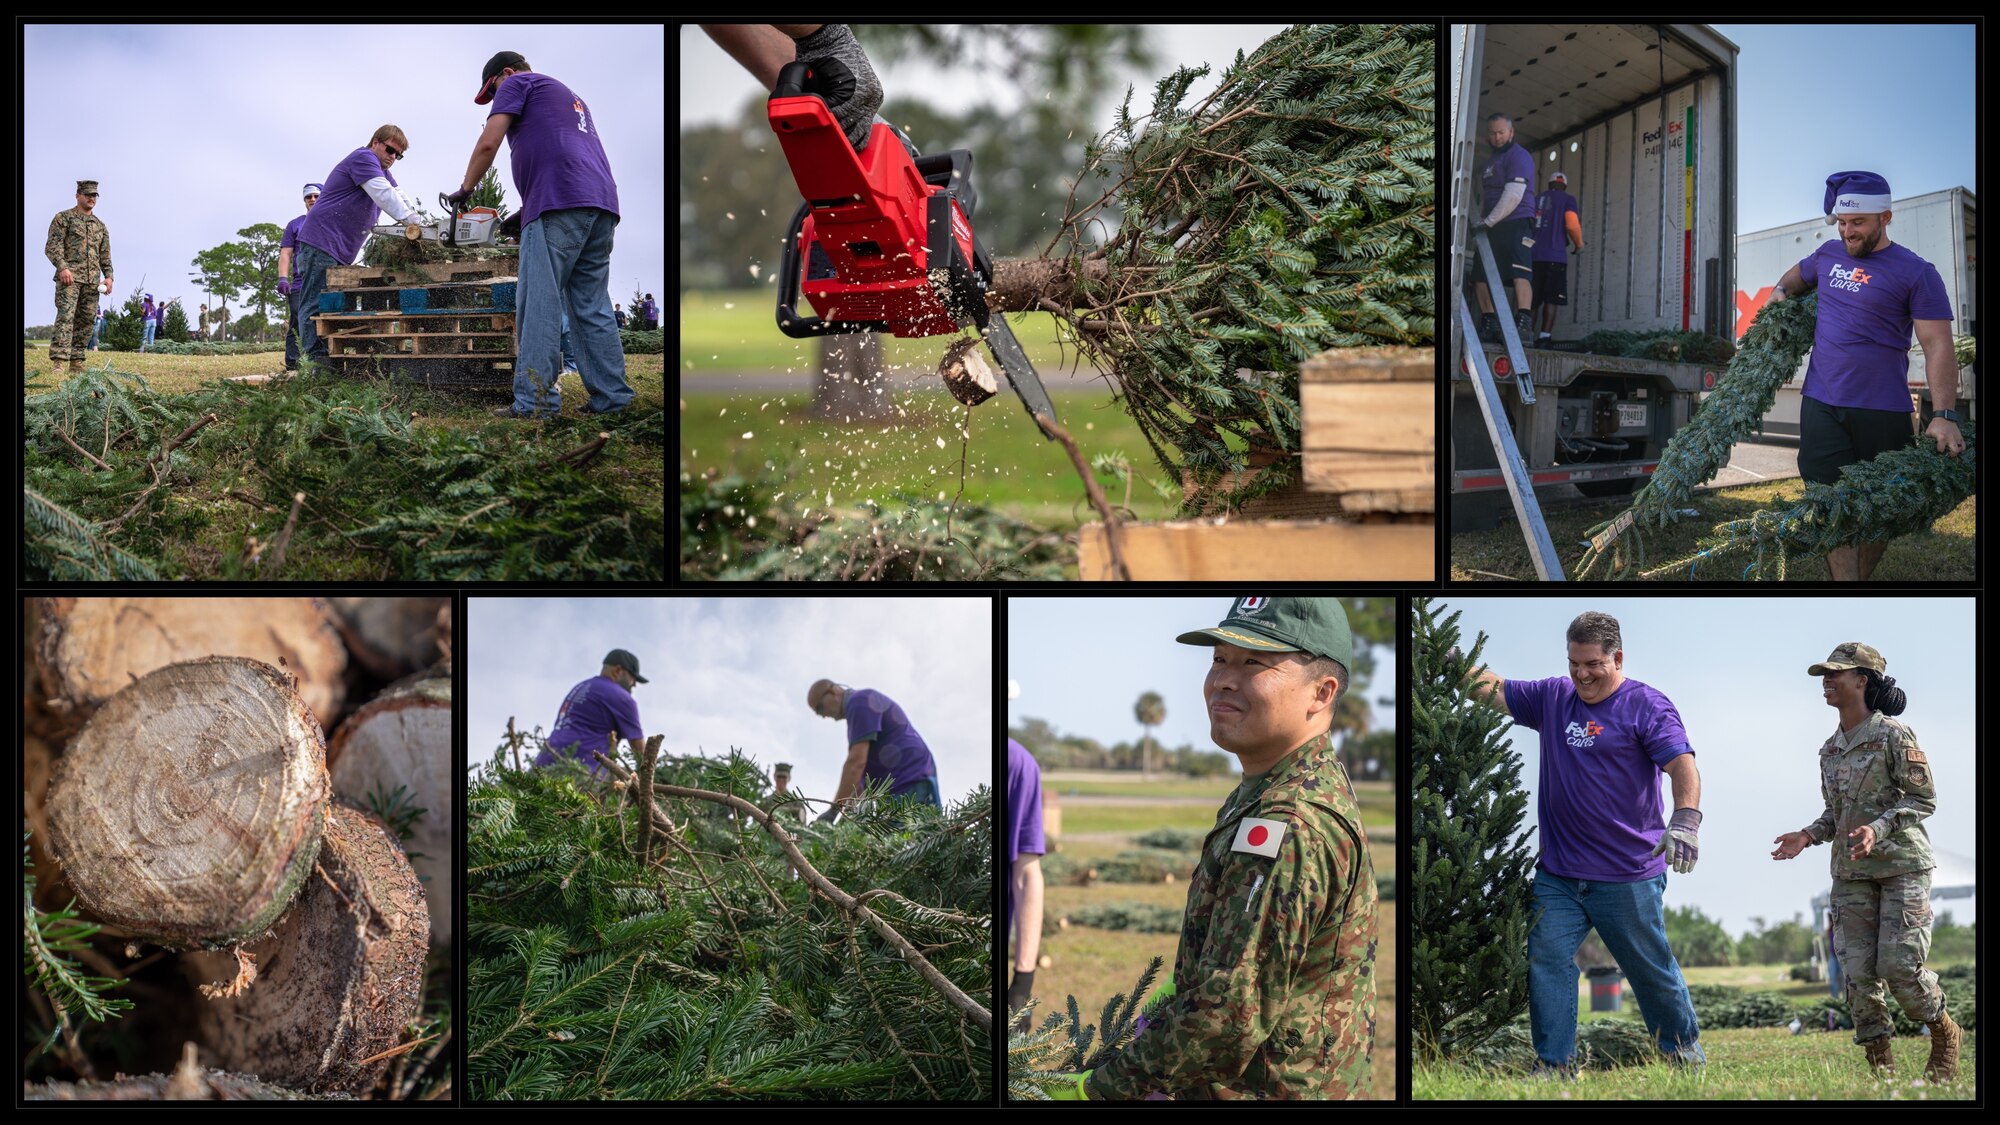 Members and their families pick up Christmas trees during the Trees for Troops event at MacDill Air Force Base, Florida, Dec. 9, 2021.